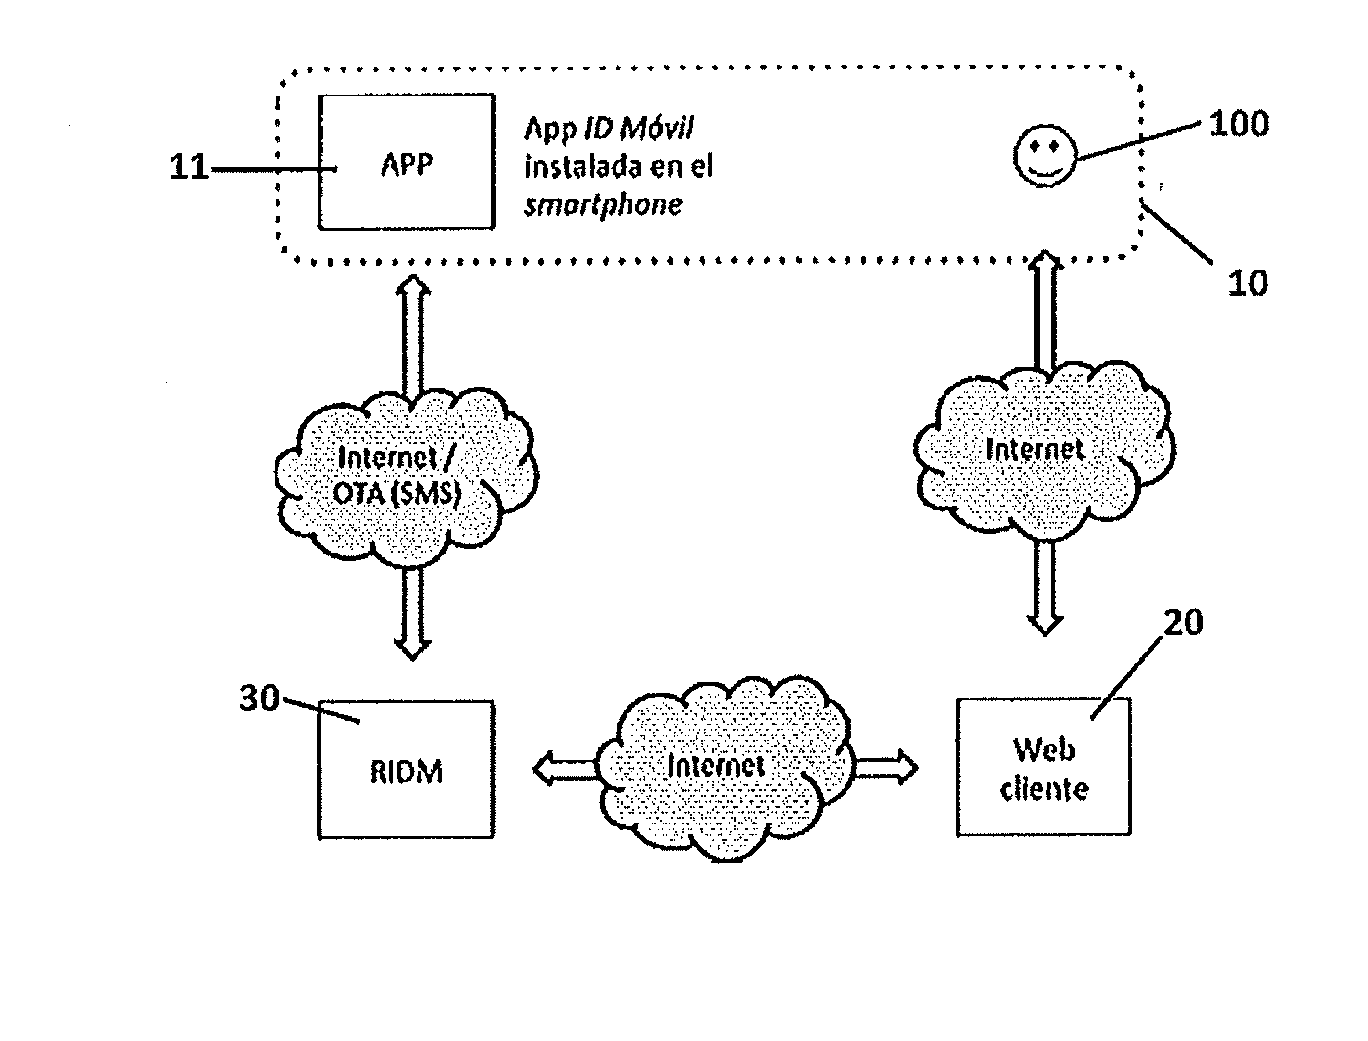 Procedure for generating a digital identity of a user of a mobile device, digital identity of the user, and authentication procedure using said digital identity of the user